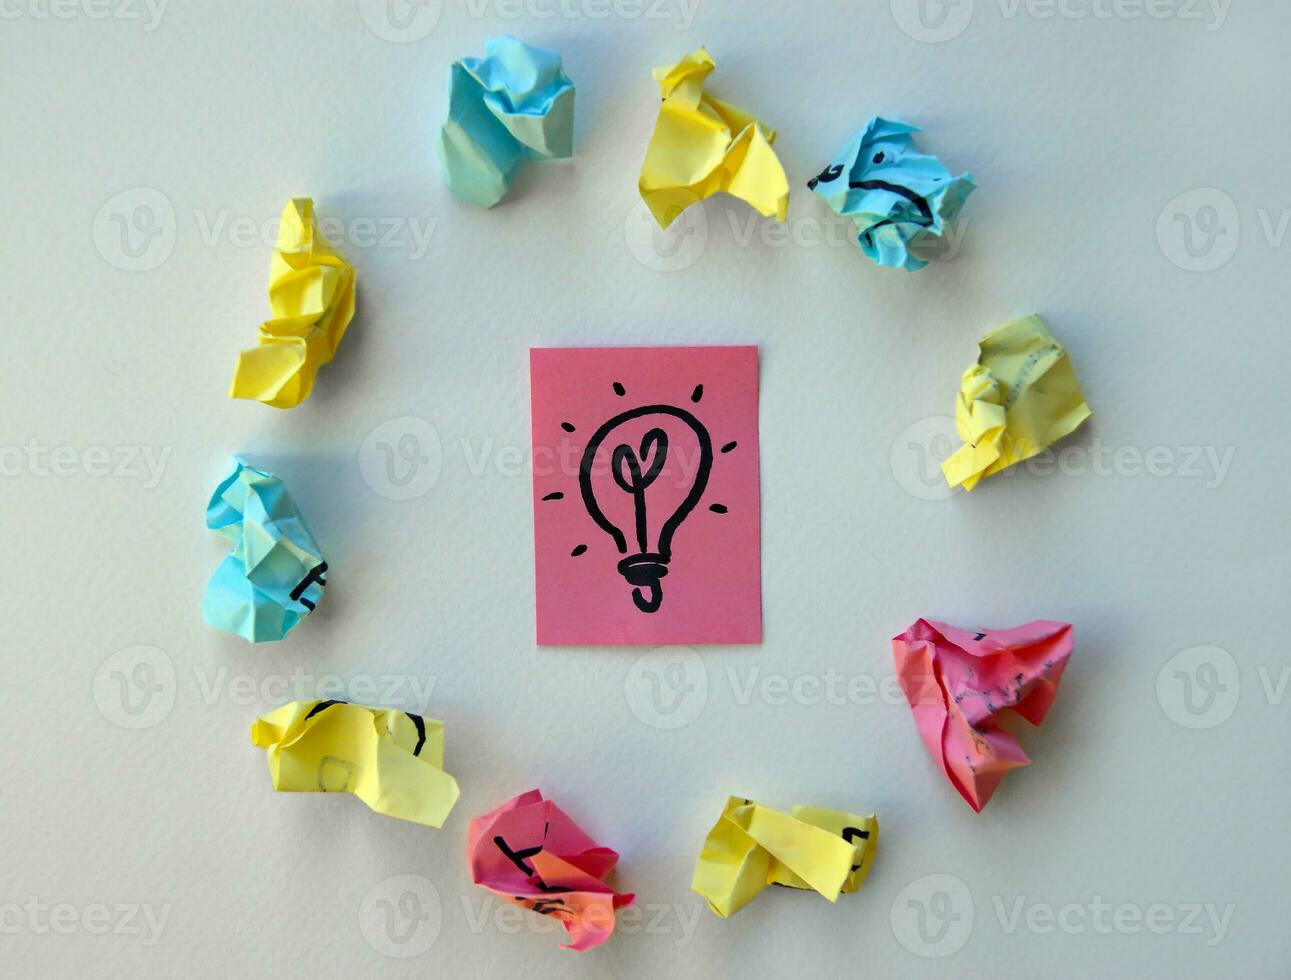 On the pink sheet is painted a lamp as a symbol of ideas and insight. photo